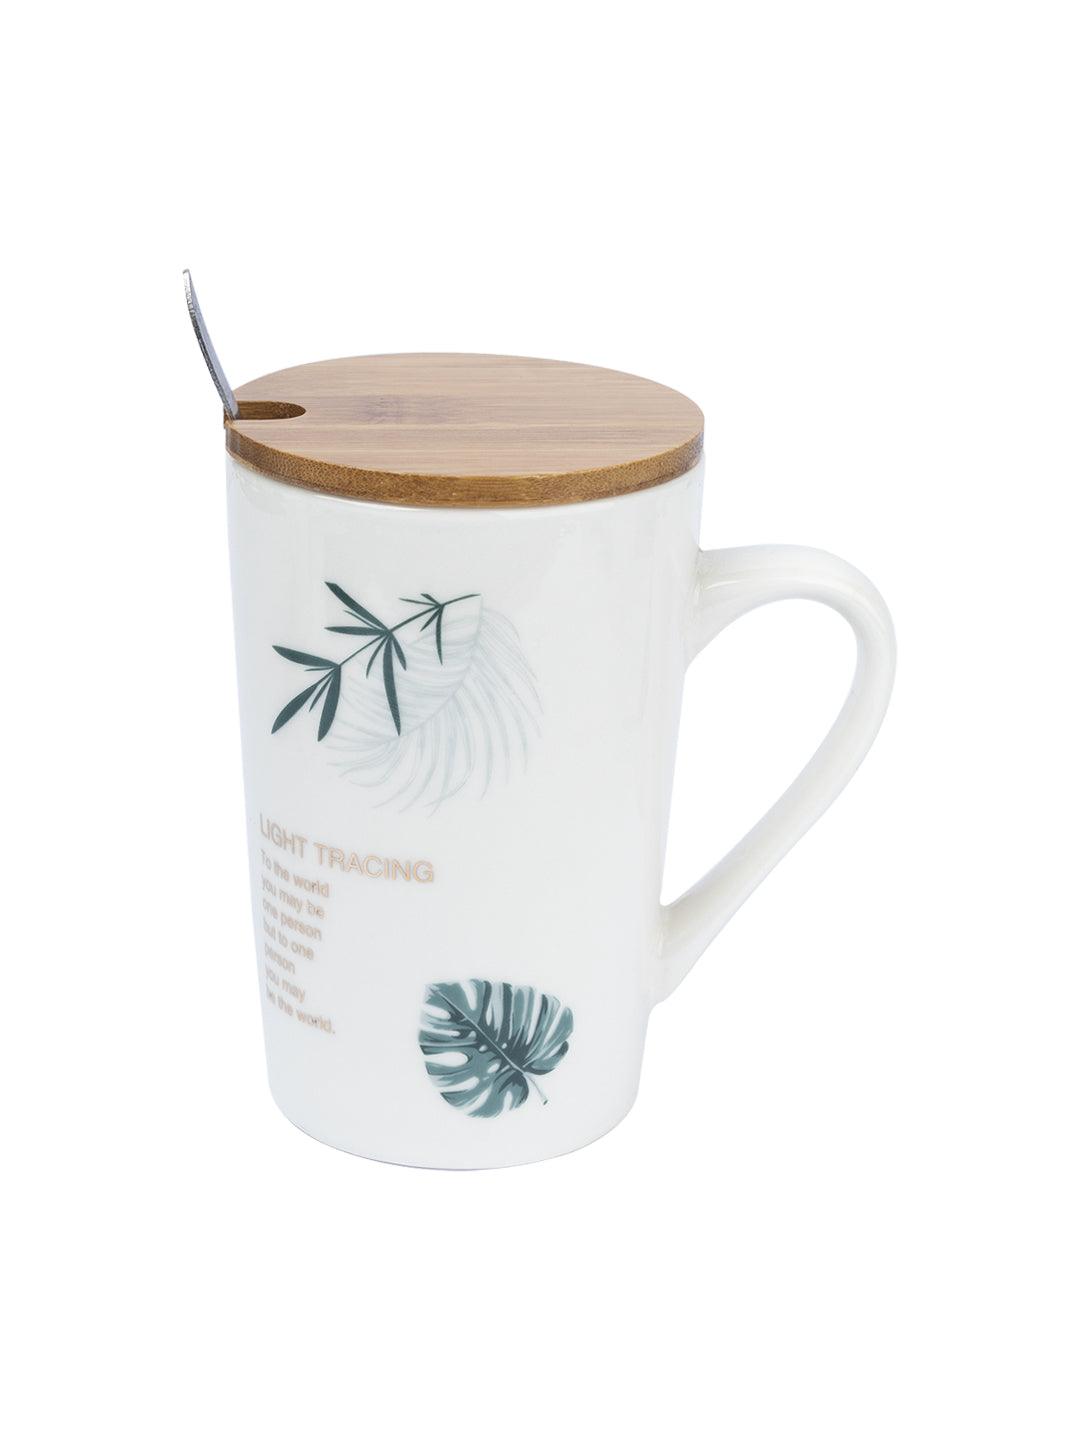 LIGHT TRACING' Coffee Mug With Wooden Lid and Spoon - White, 450mL - MARKET 99